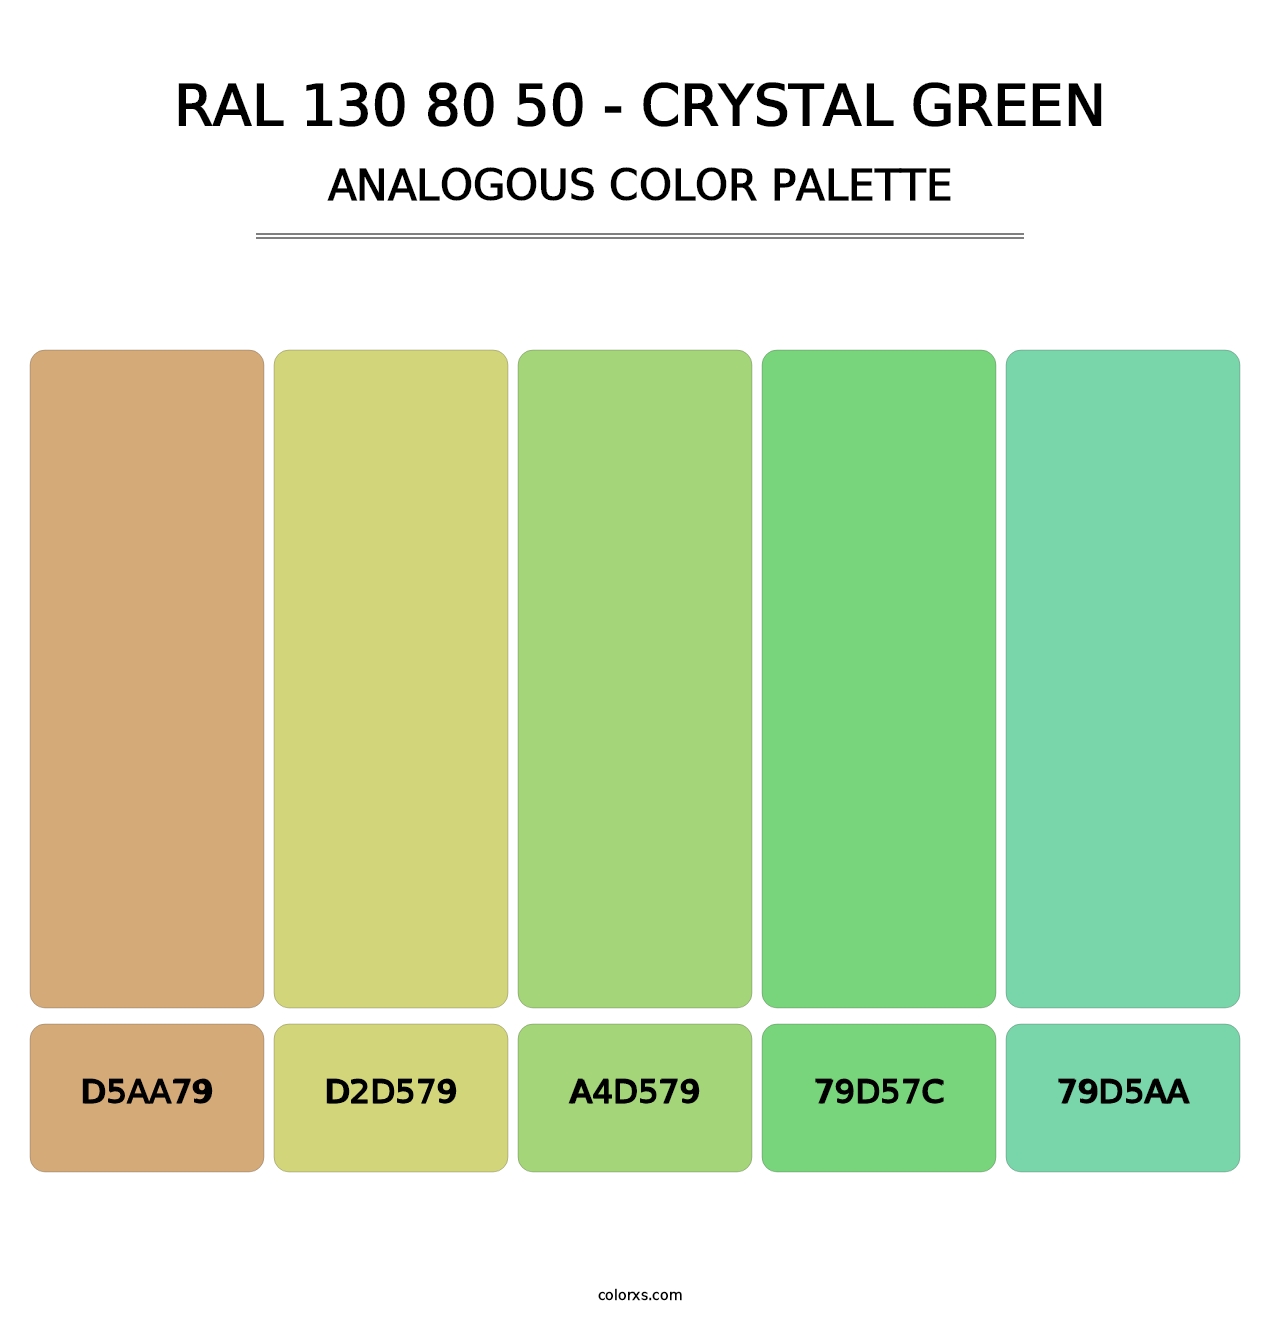 RAL 130 80 50 - Crystal Green - Analogous Color Palette